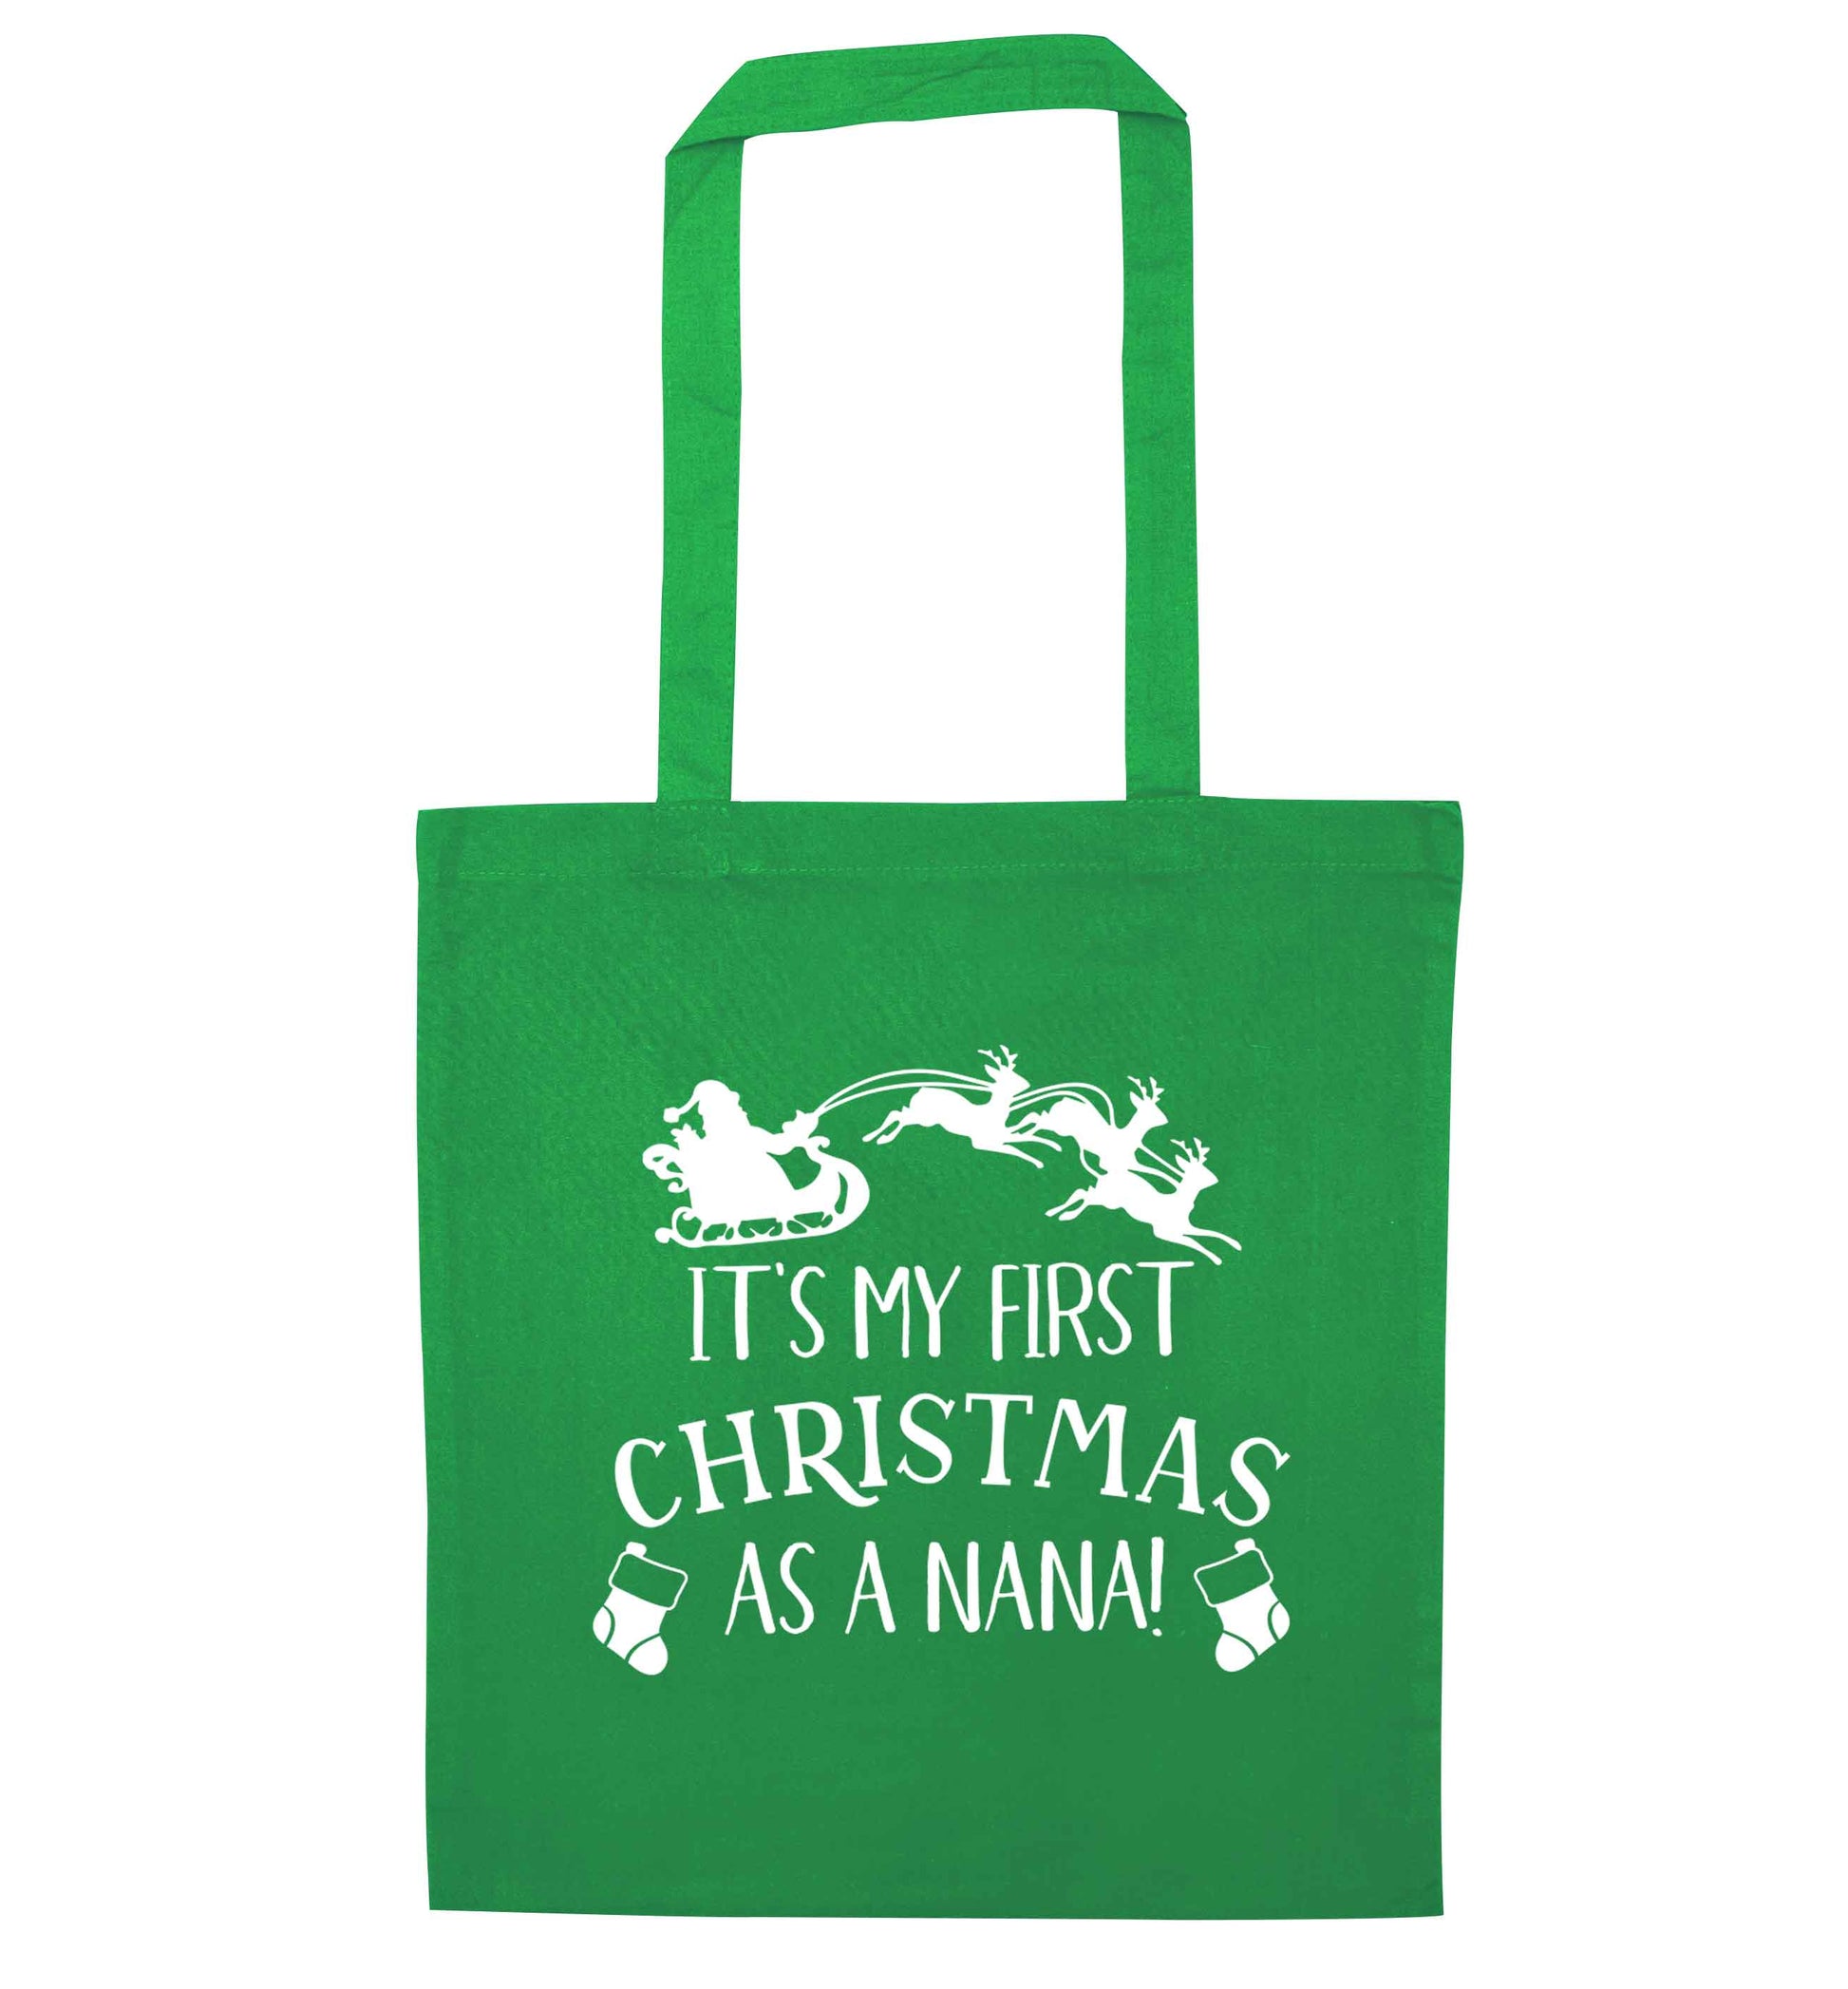 It's my first Christmas as a nana green tote bag